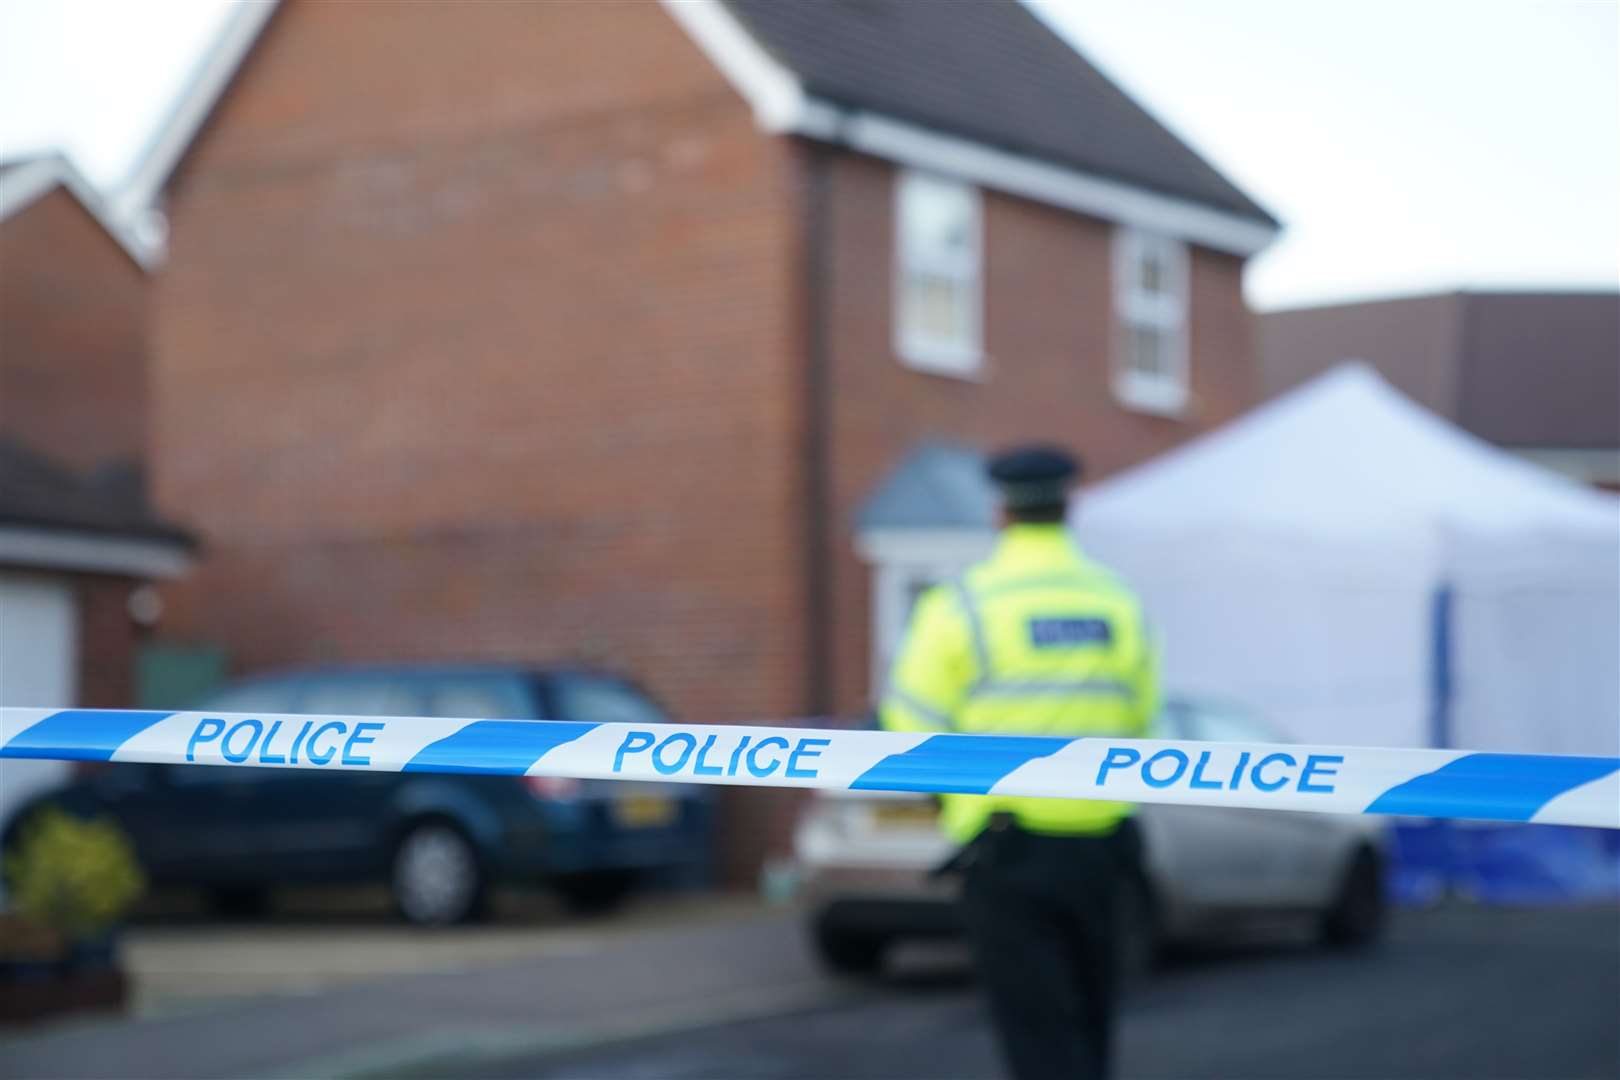 Police outside a house in Costessey near Norwich after four people were found dead inside the property (Joe Giddens/PA)